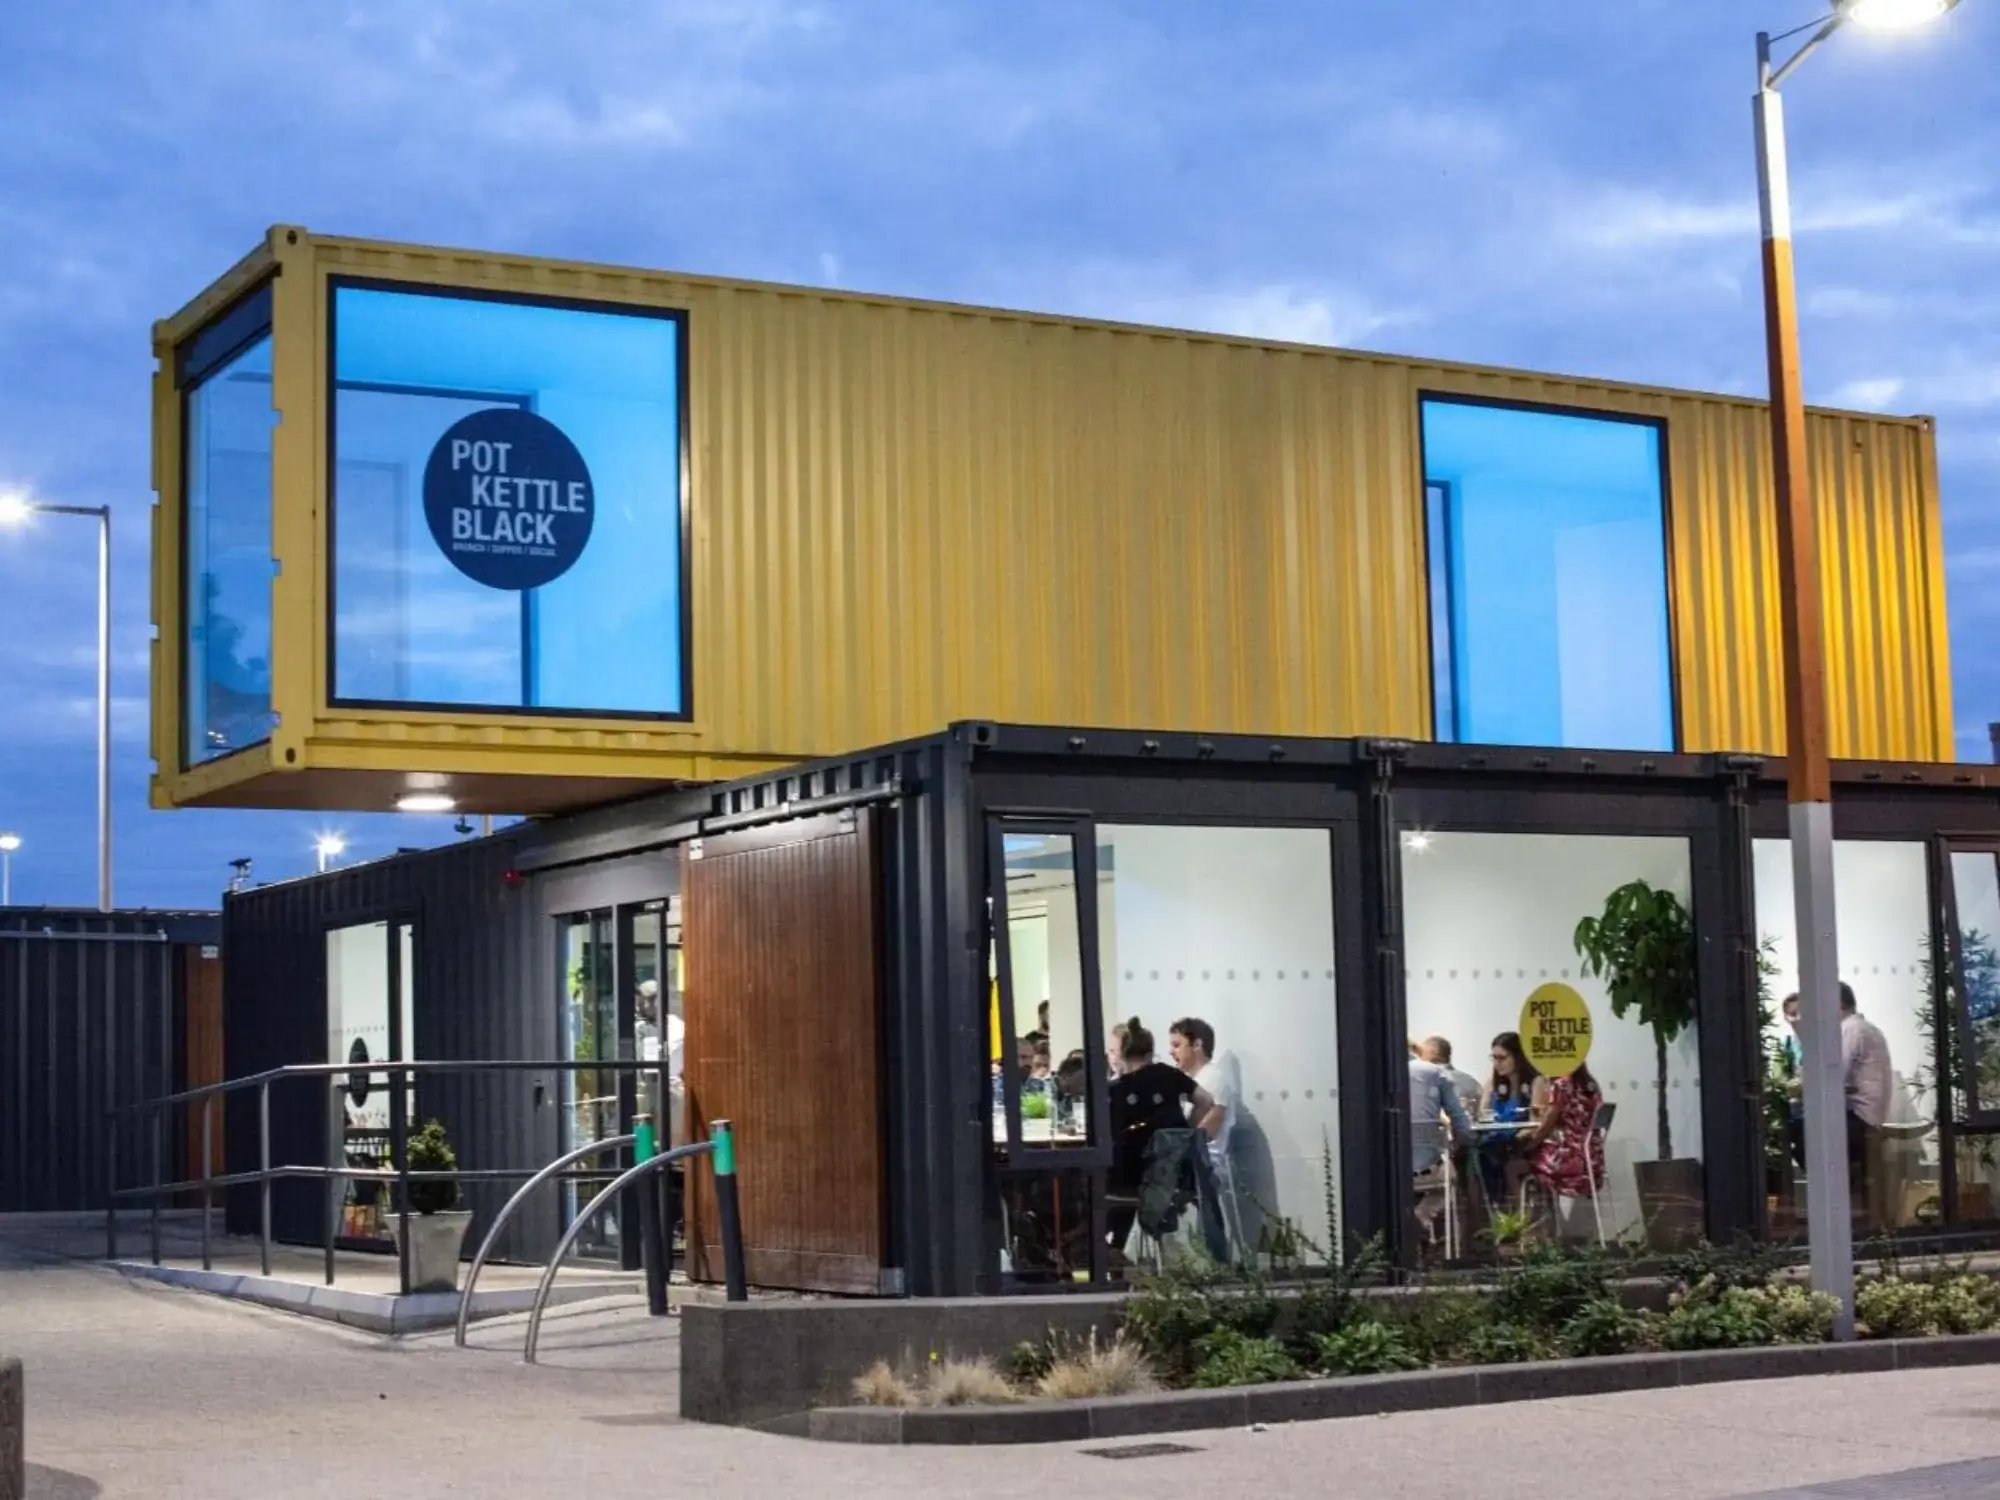 Restaurant Made from Shipping Containers